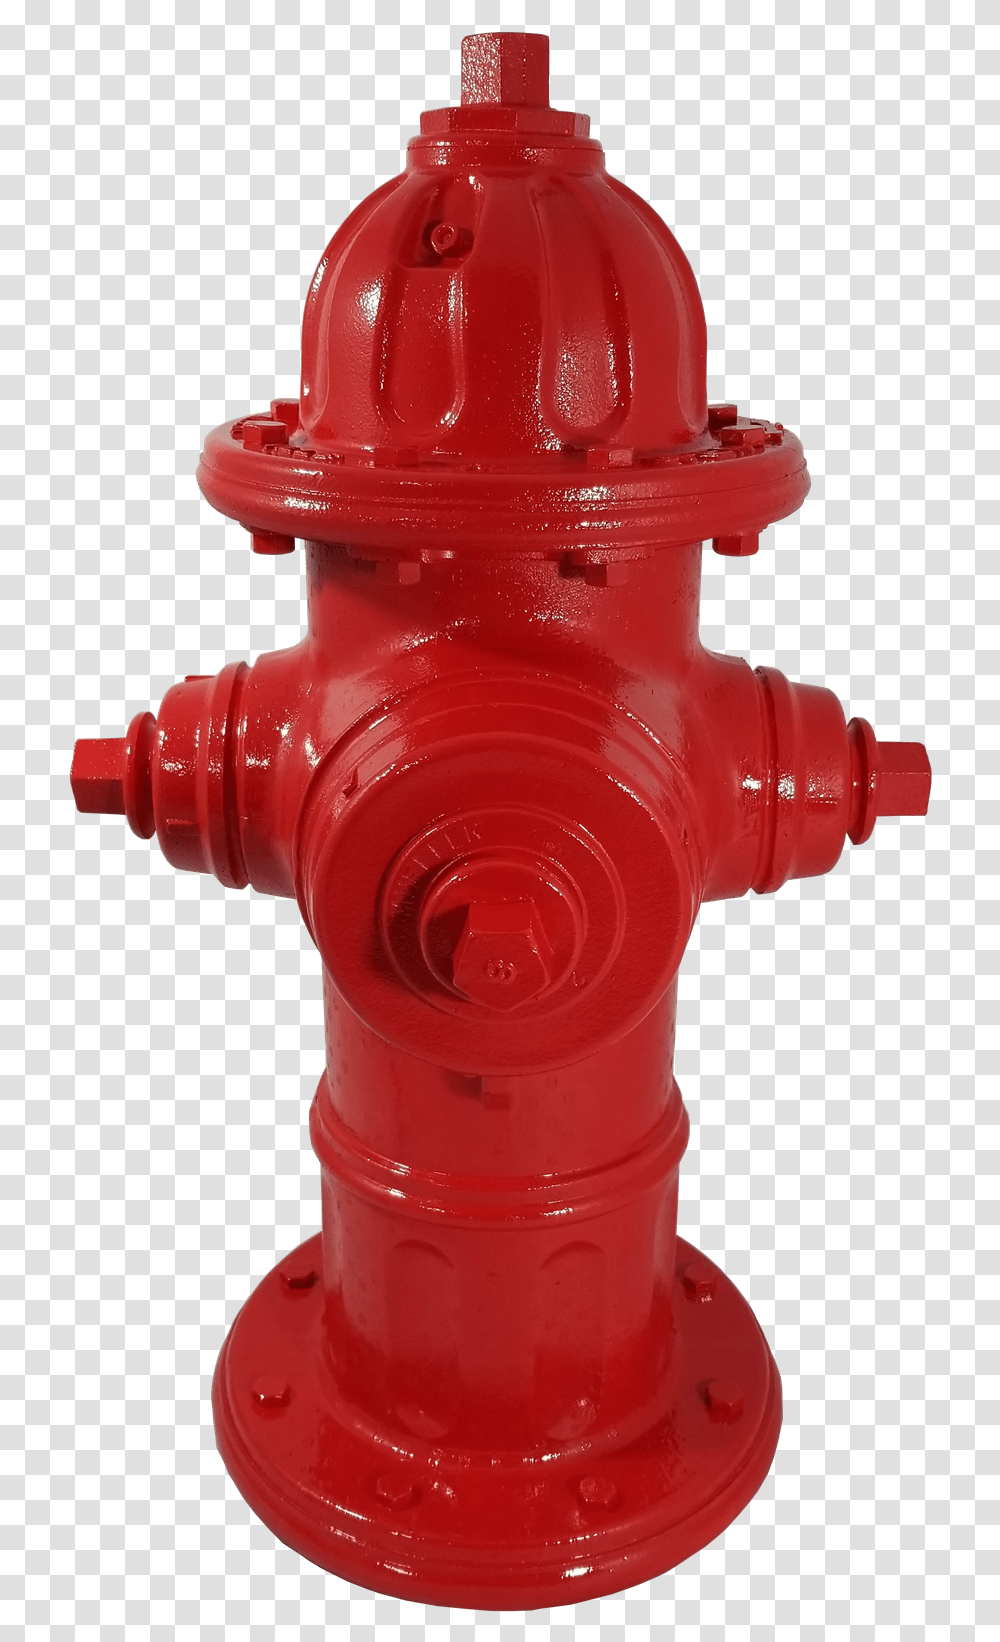 Fire Hydrant Background Mart Fire Hydrant Background Transparent Png